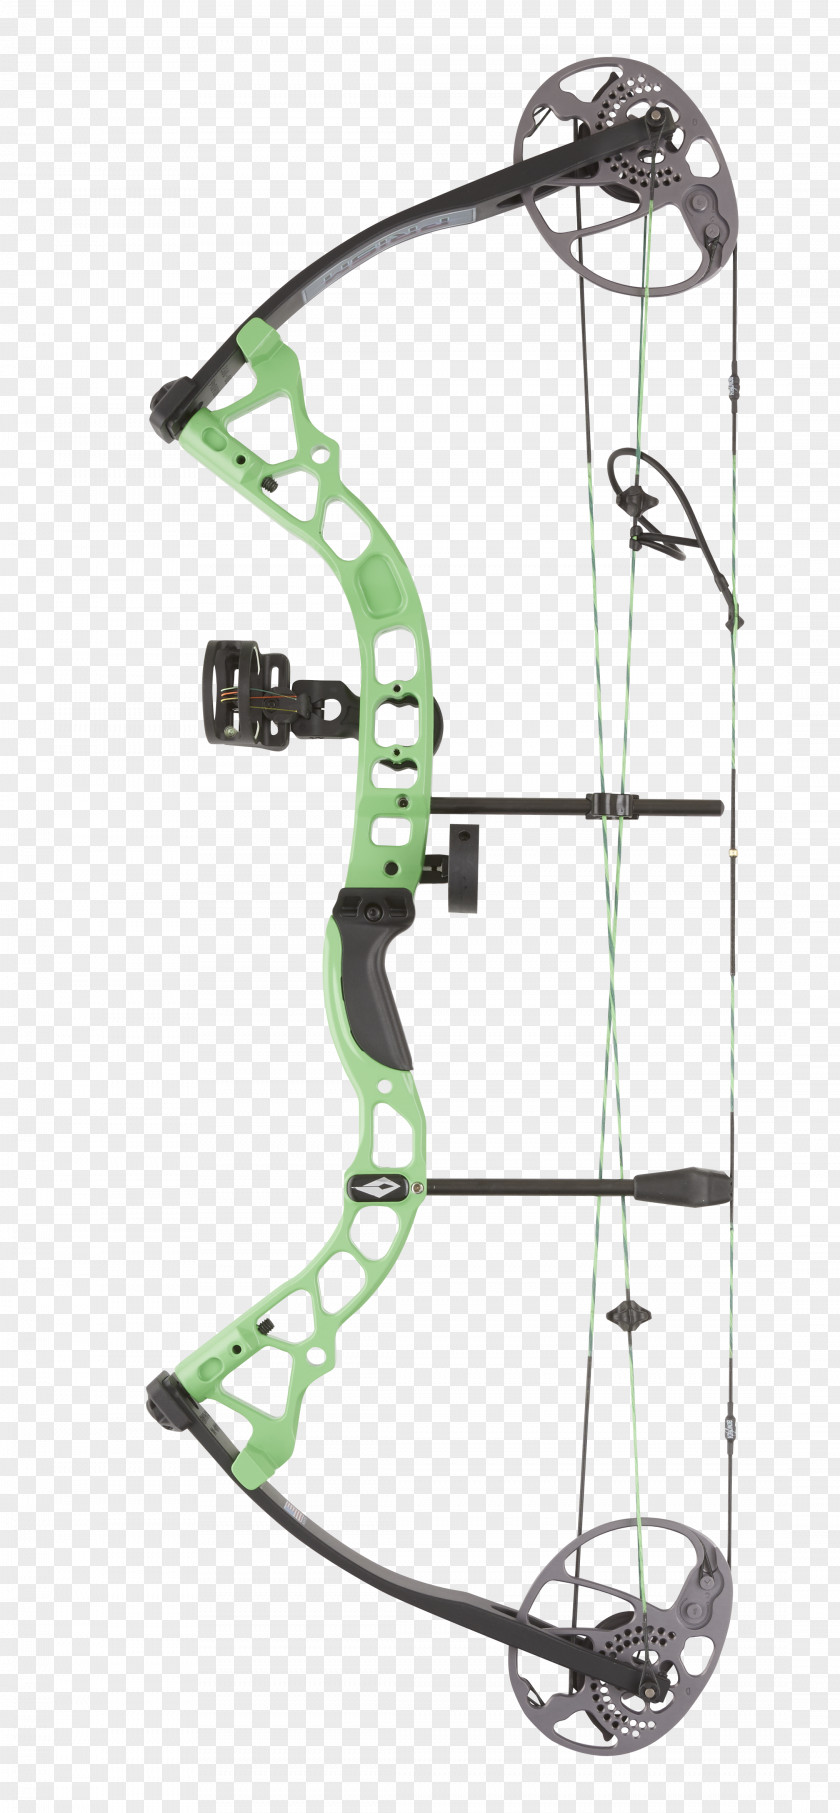 Archery Bow And Arrow Compound Bows Diamond PNG